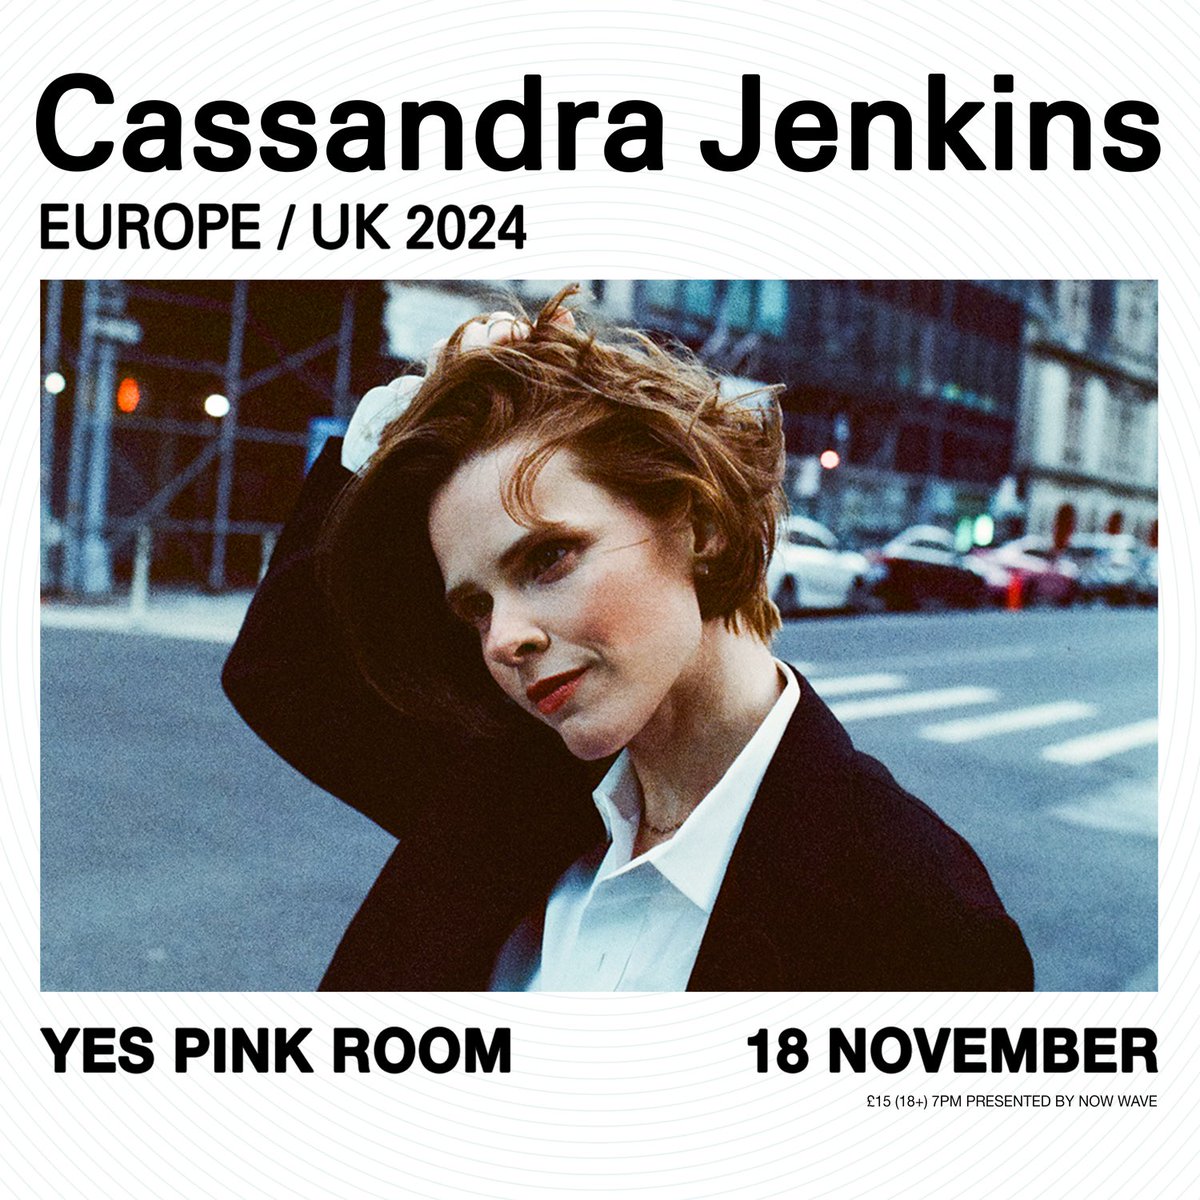 NEW SHOW… @CassFreshUSA heads to @yes_mcr on Nov 18th, tix on sale Friday at 10am. “Filled with people, stories, and dialogue, the New York songwriter’s second album flows like an emotional breakthrough, tying together disparate observations into a serene and unified vision.”